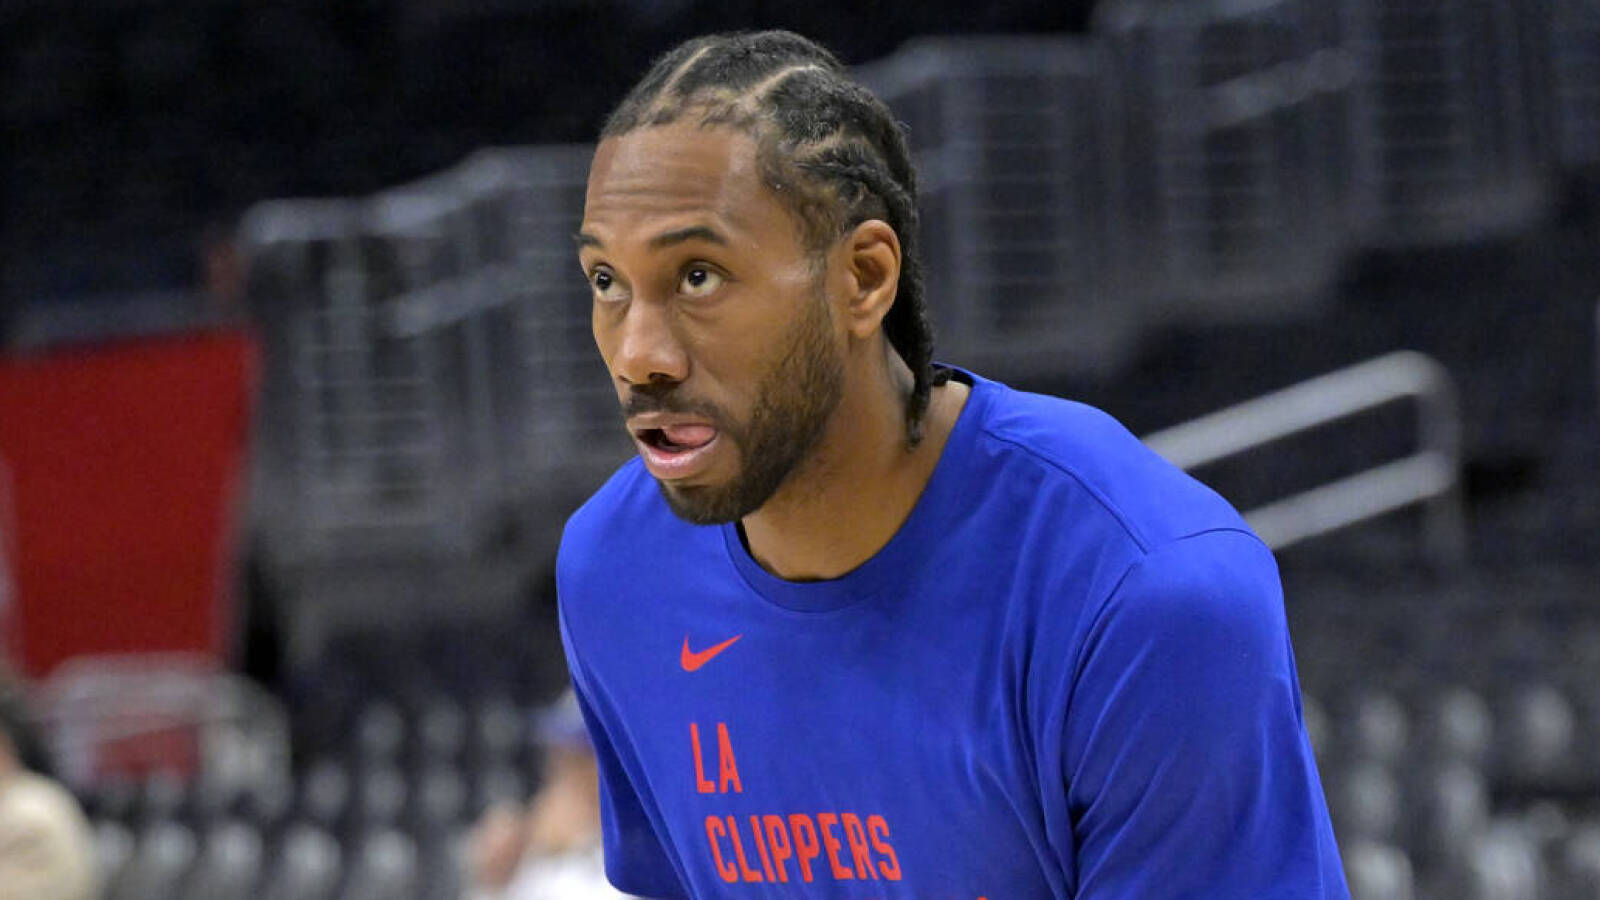 Clippers' Kawhi Leonard to miss Game 1 vs. Mavs, timeline to return unclear